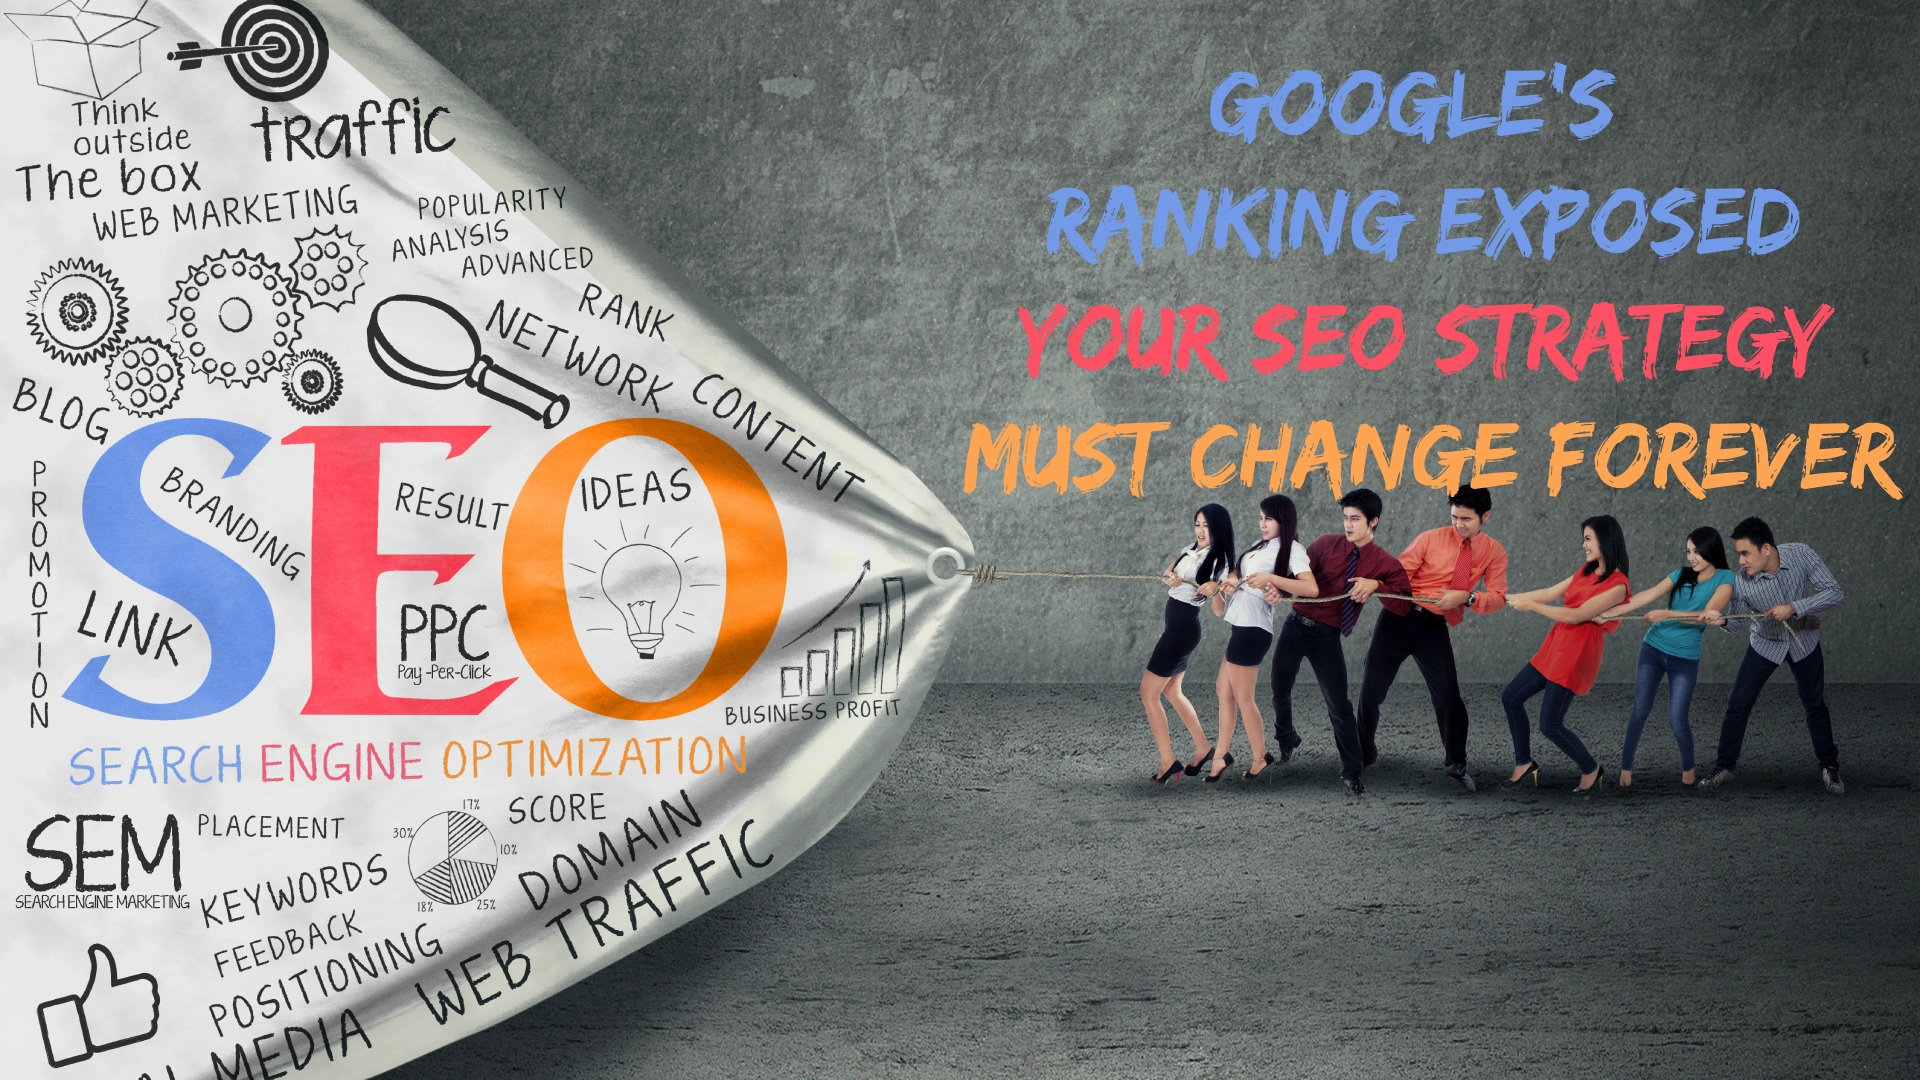 Google’s Ranking Exposed: Your SEO Strategy Must Change Forever